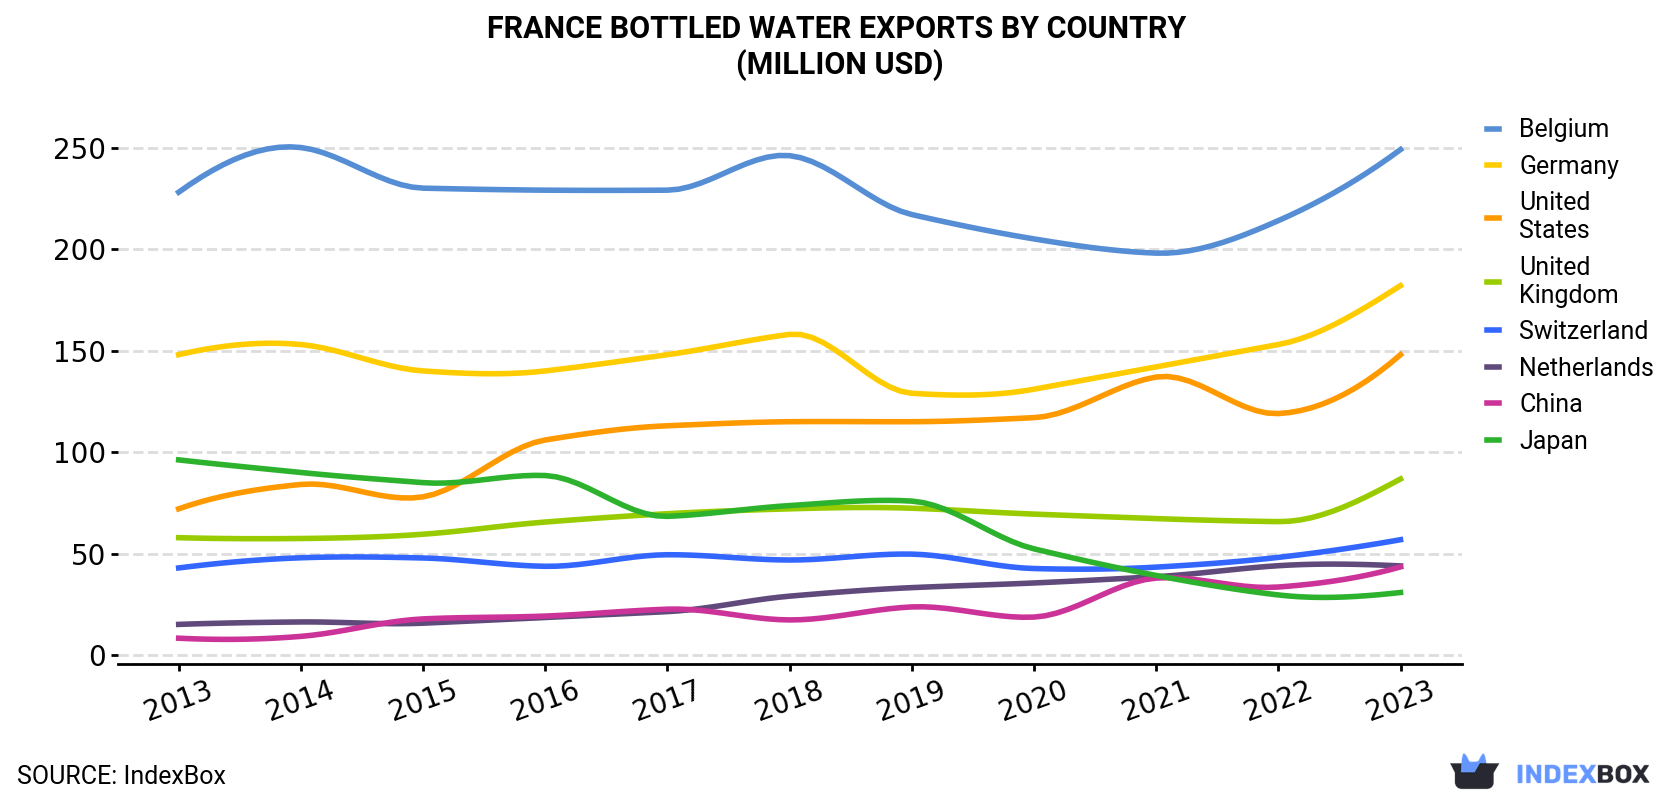 France Bottled Water Exports By Country (Million USD)